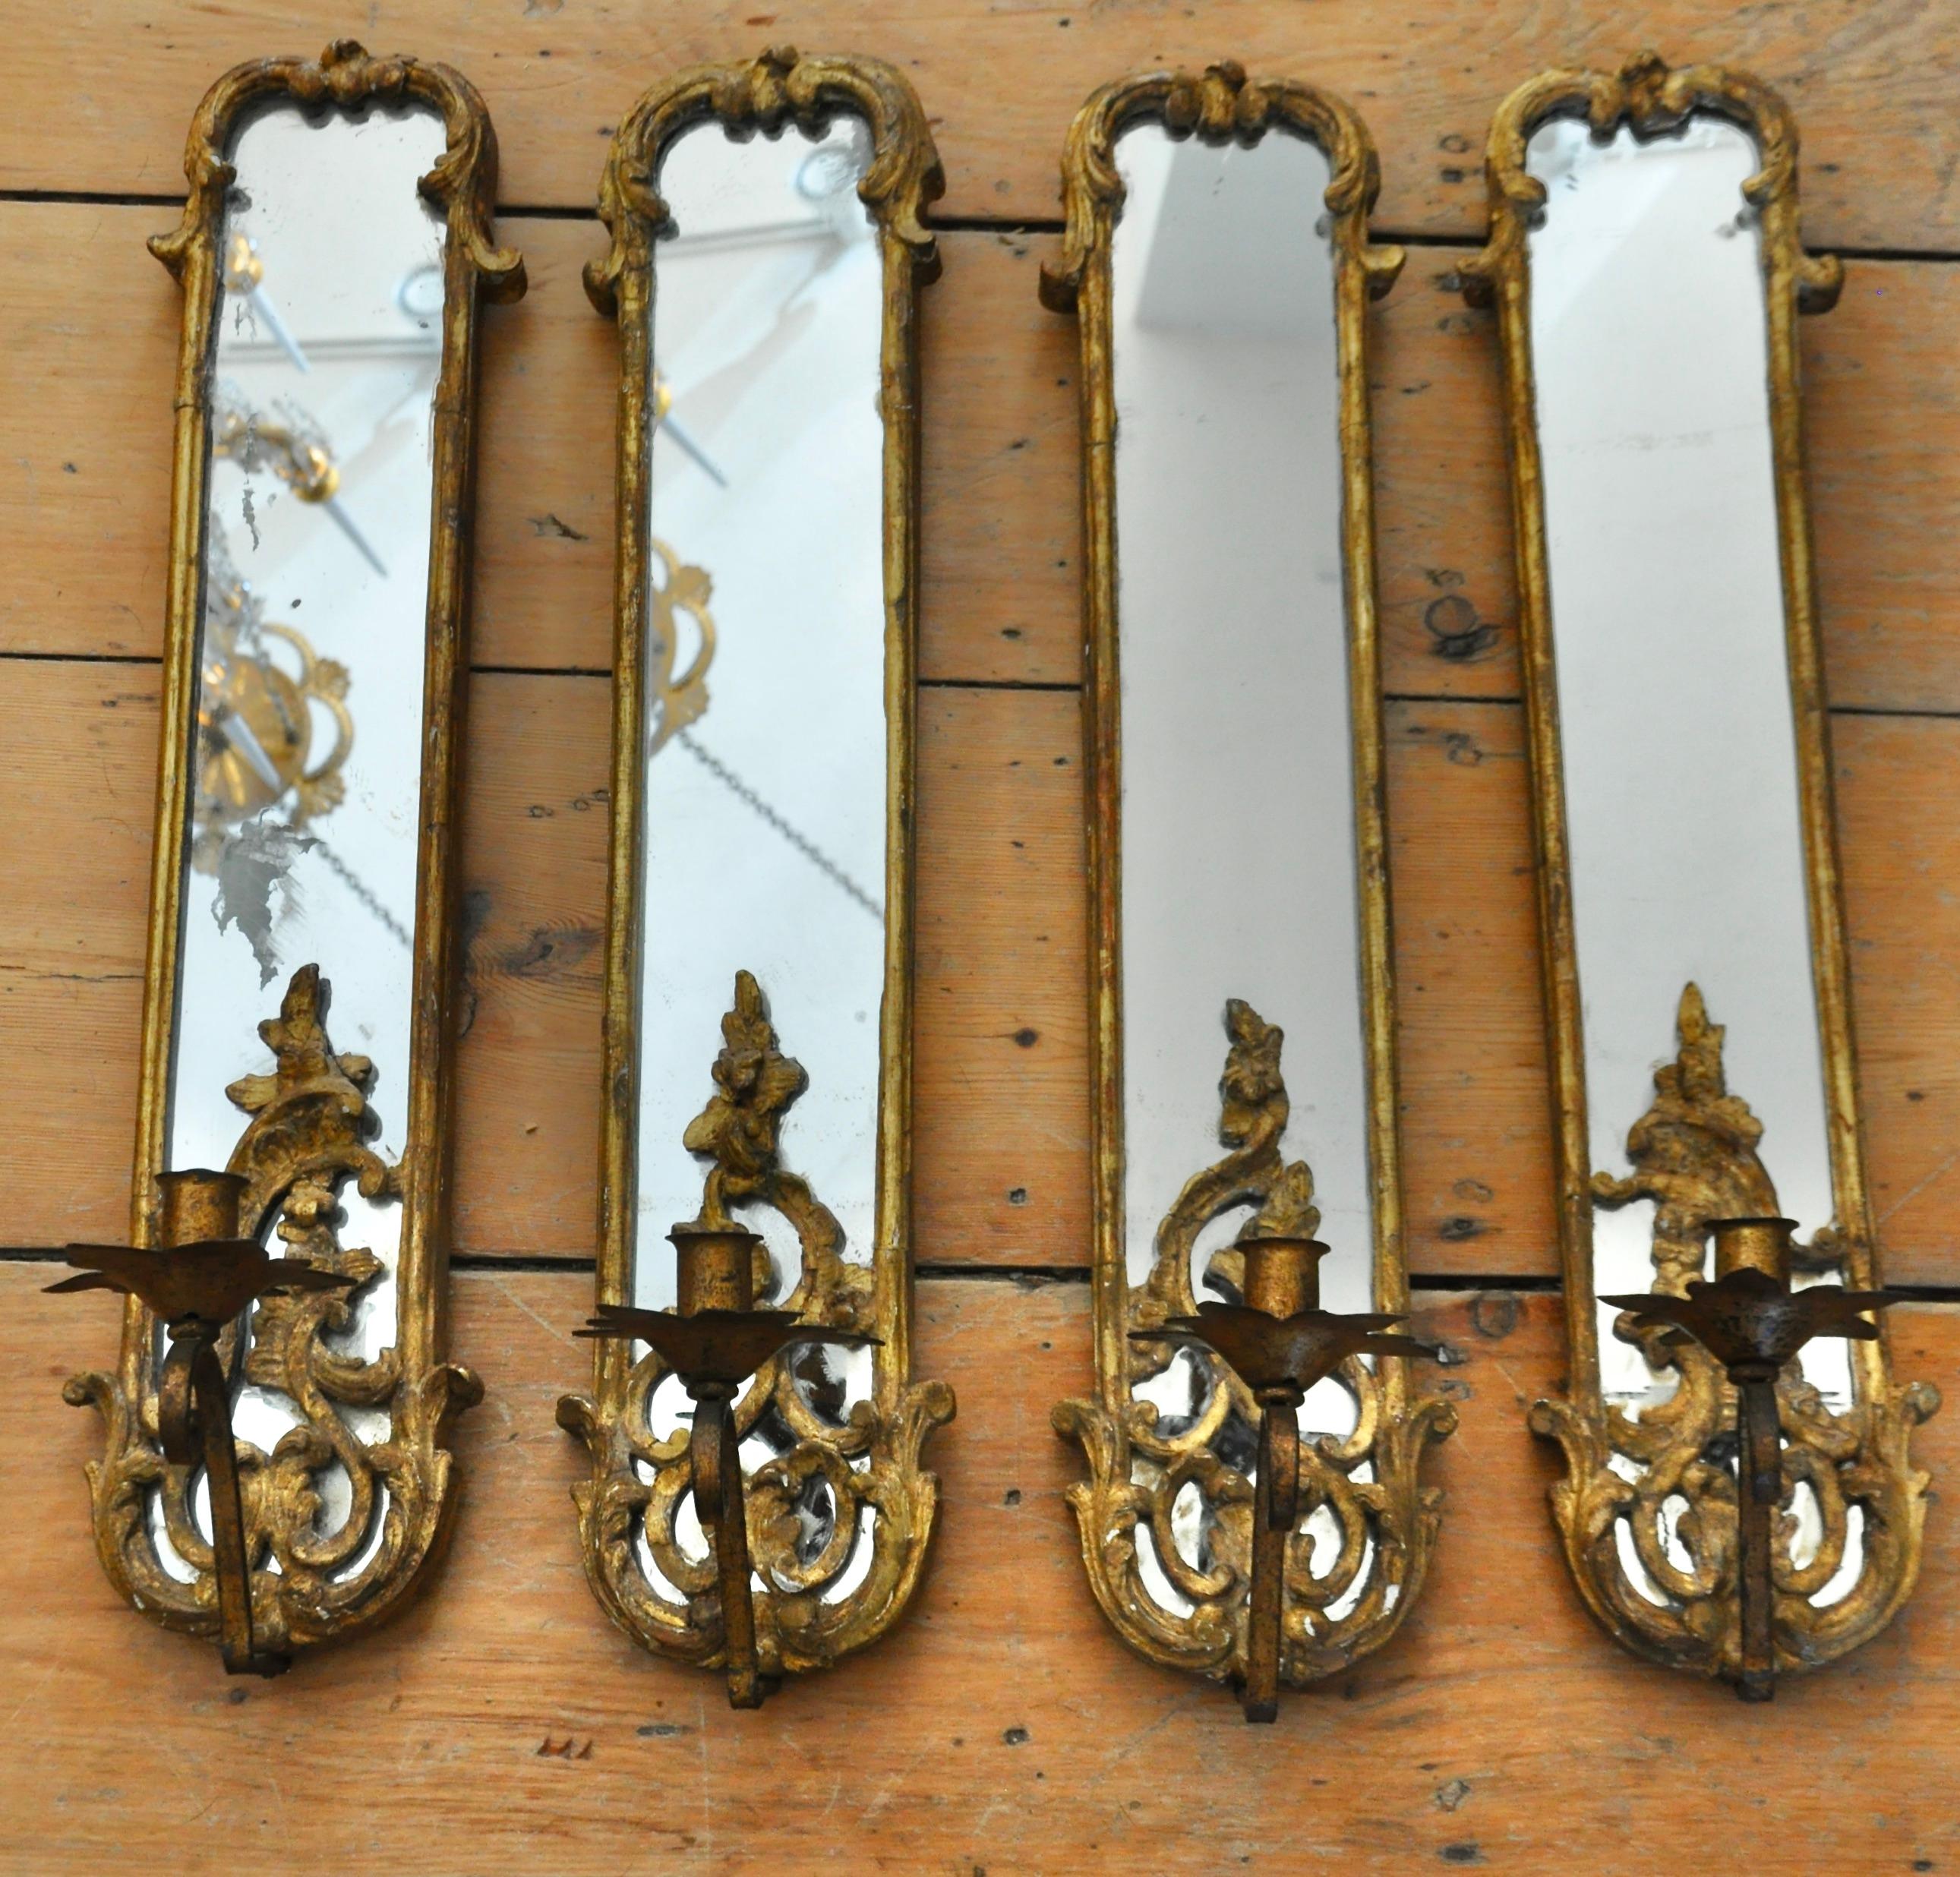 Set of 4 Rococo giltwood and iron mirror back sconces. Two matched pairs. Original gilding and mirror. Wrought iron candle holders.